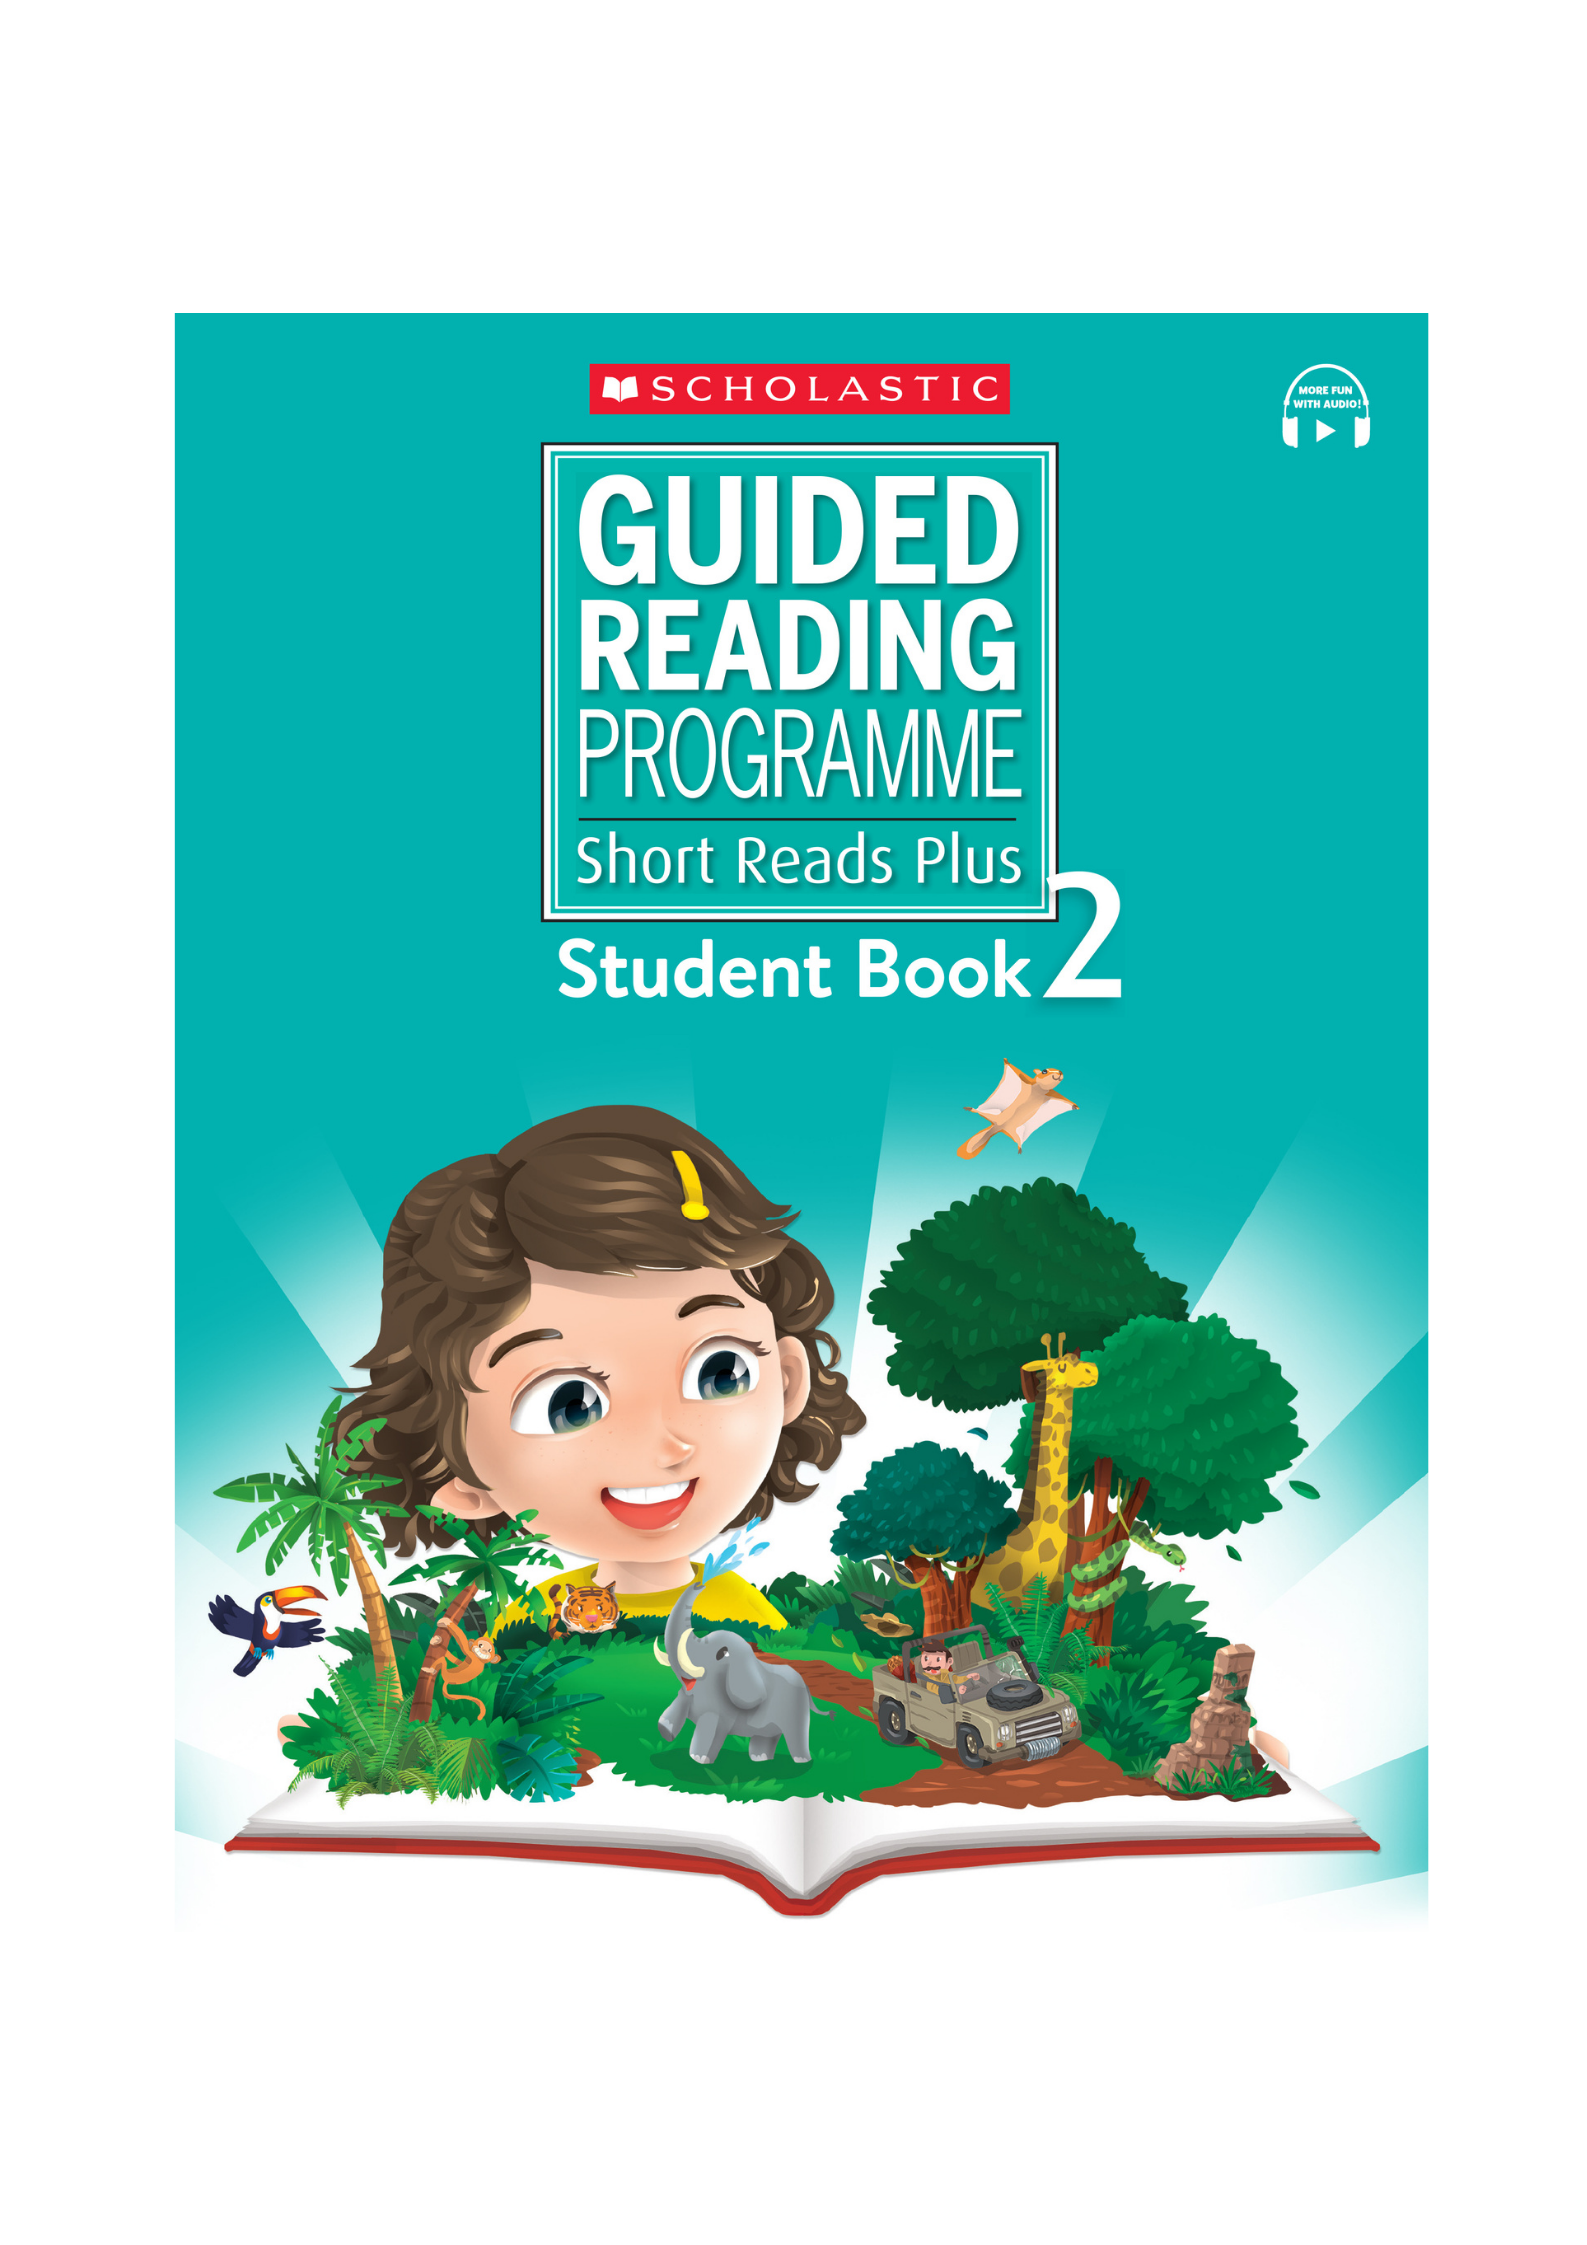 Guided Reading Short Reads Plus Student Book – Level 2 (Asia)